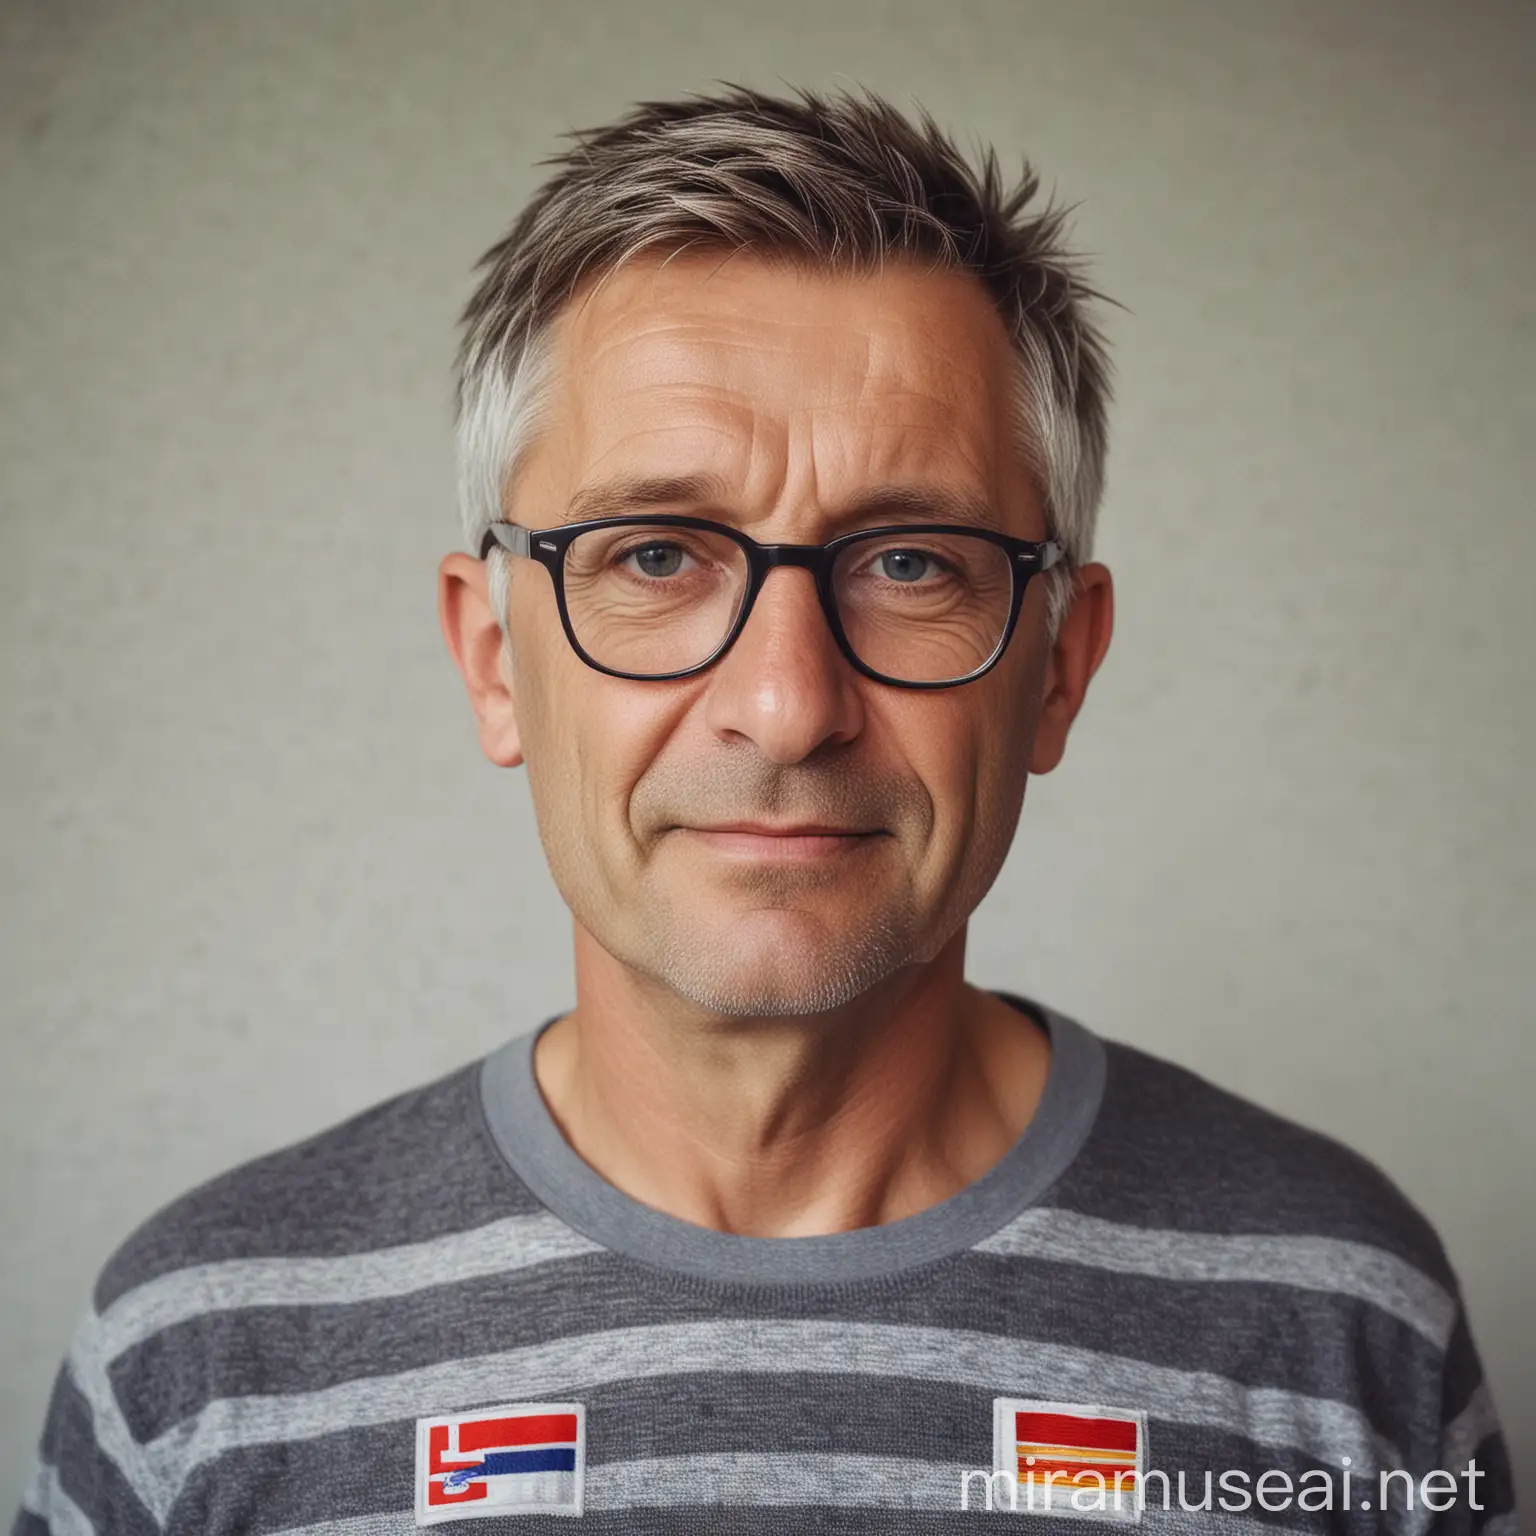 Mature Icelandic Man in Traditional Shirt with Glasses and Short Hair